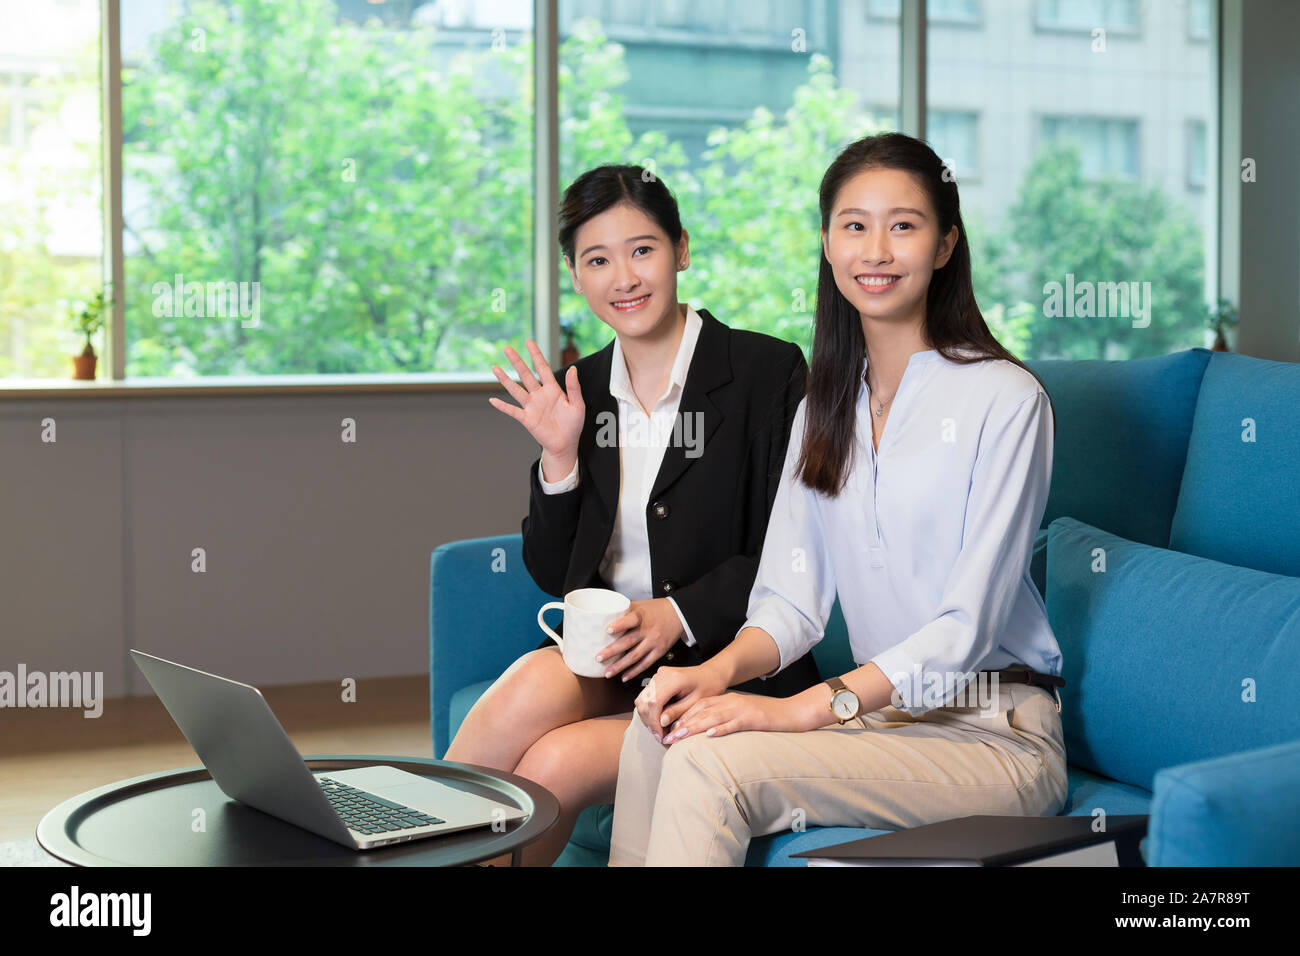 Photograph of two young businesswomen sitting on a blue sofa in an office and smiling at the camera with one also waving Stock Photo